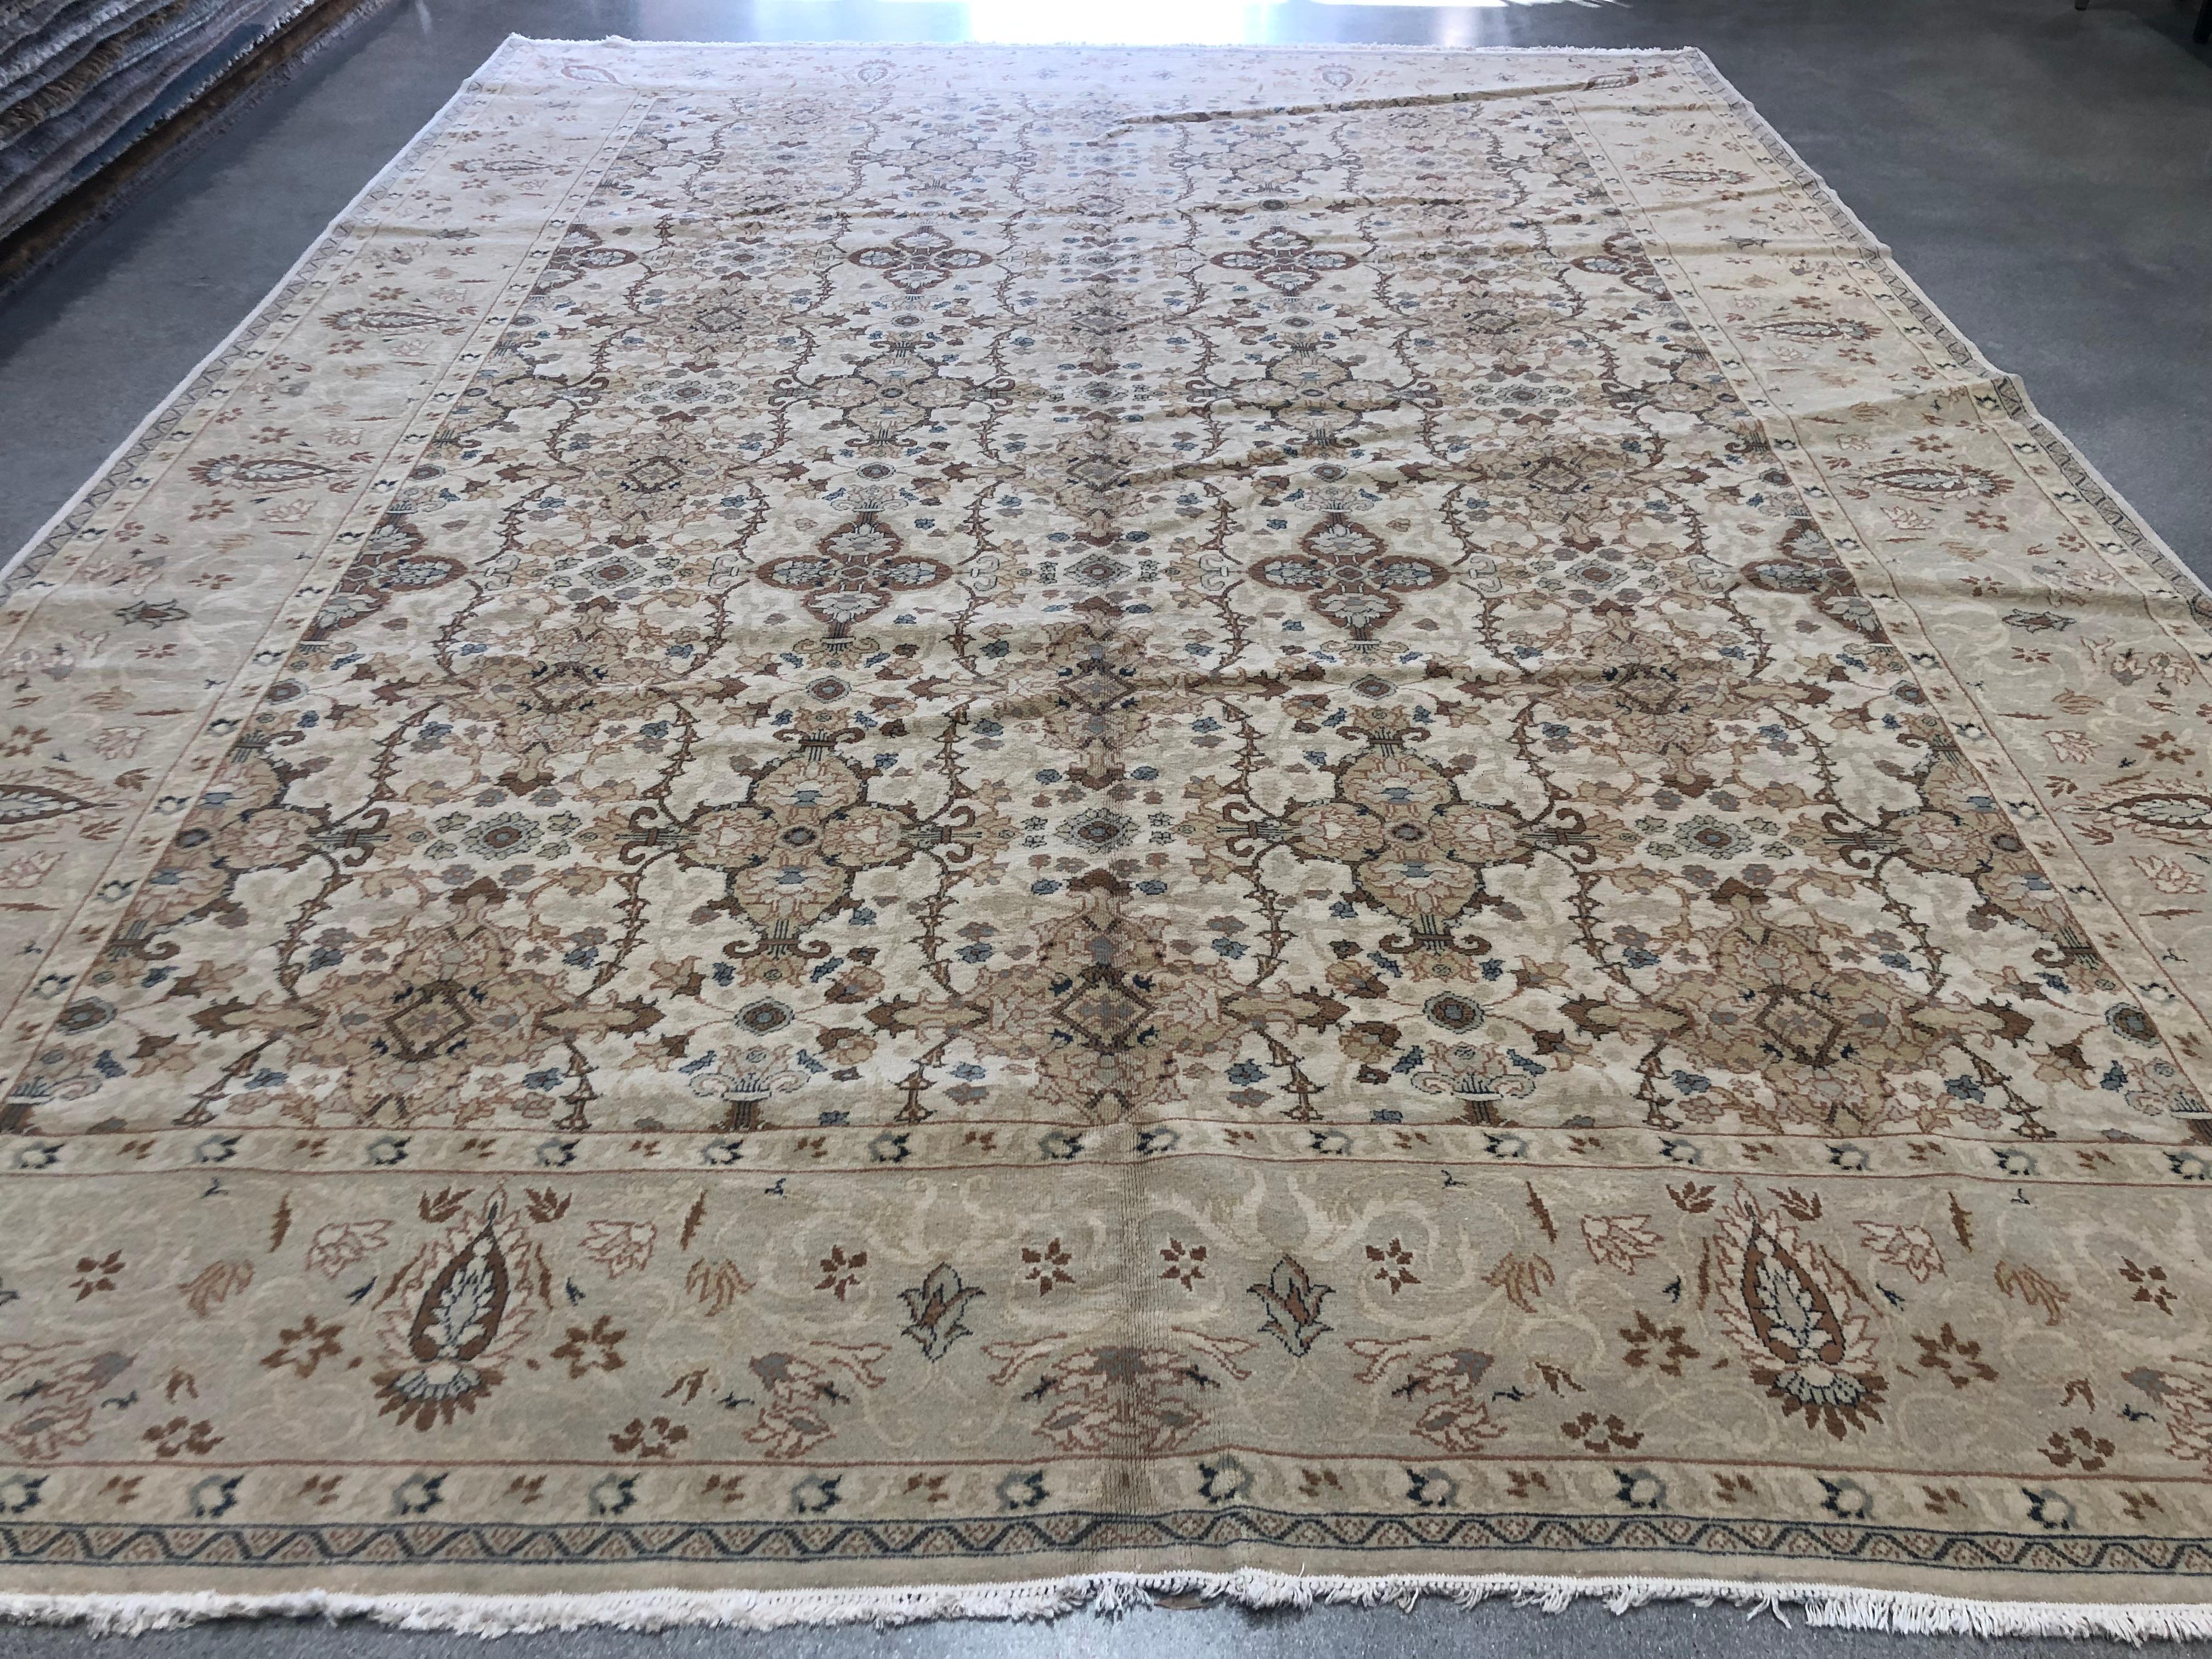 A densely patterned large center panel is surrounded by a light border with floral motif in this charming wool area rug from the European Design collection. Warm beige, brown and gold tones predominate making for a piece that can blend easily into a